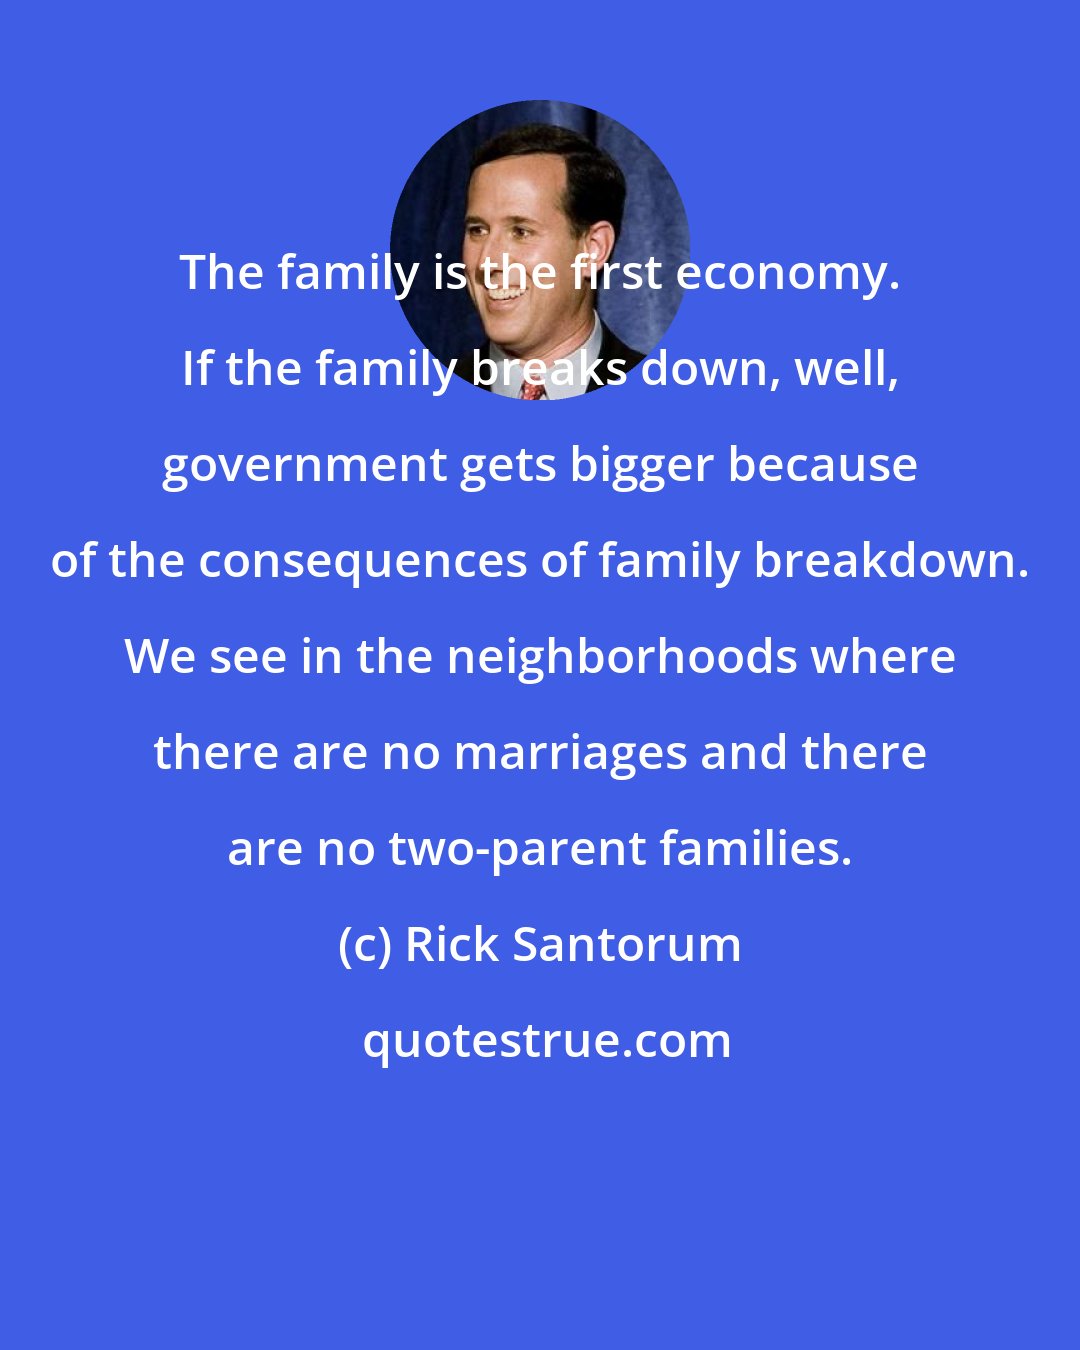 Rick Santorum: The family is the first economy. If the family breaks down, well, government gets bigger because of the consequences of family breakdown. We see in the neighborhoods where there are no marriages and there are no two-parent families.